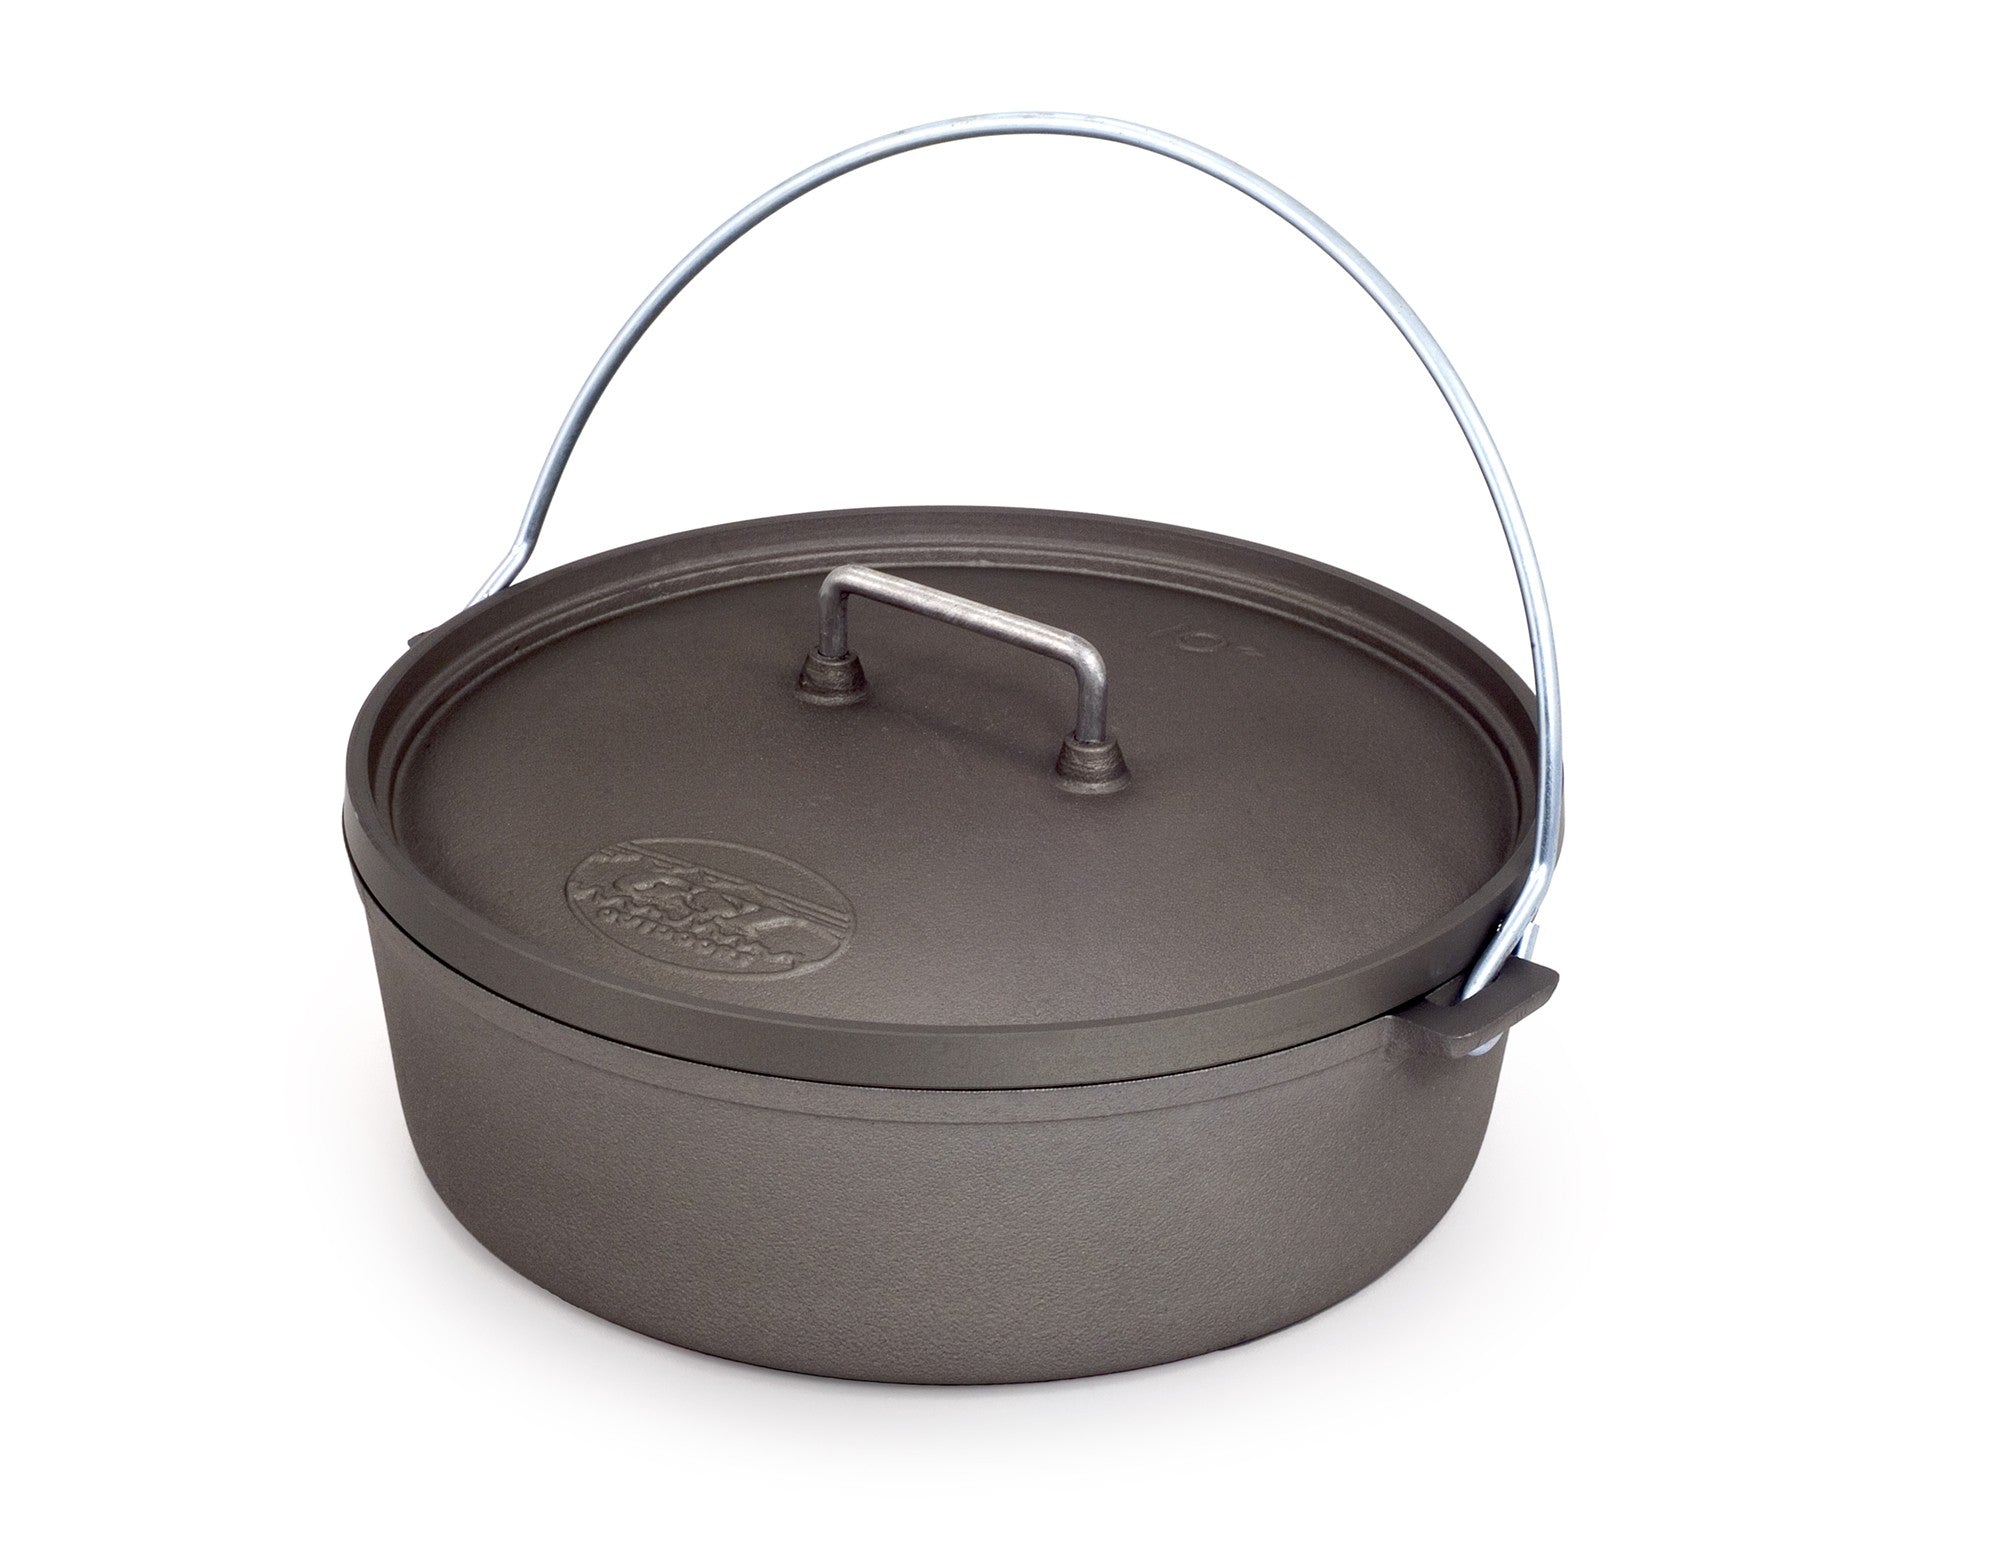 The Best Dutch Ovens for Camping (Updated 2022)